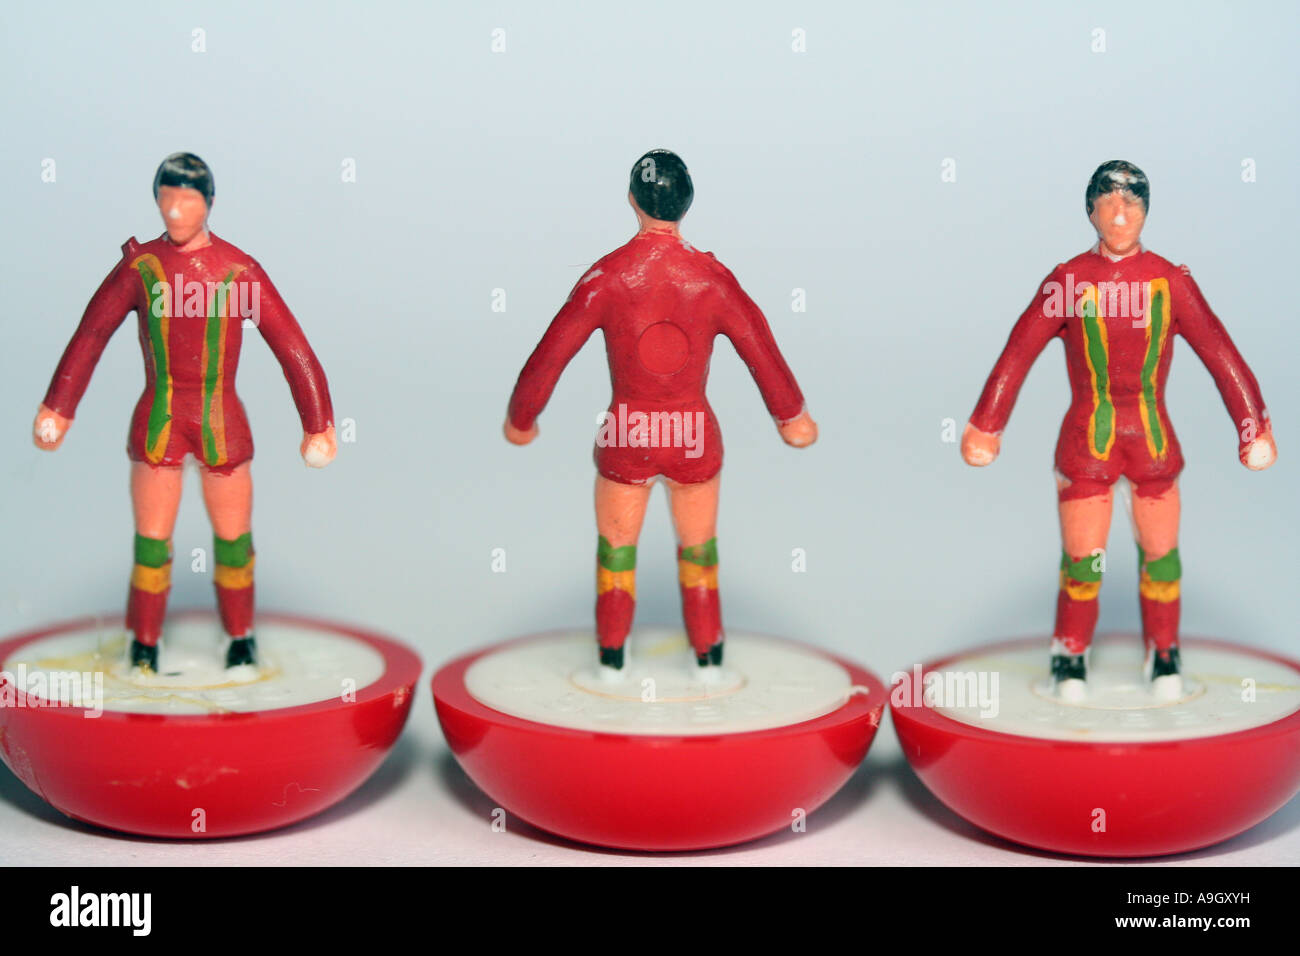 3 players in line full strip Subbuteo Wales Replica Table Football Players  Stock Photo - Alamy